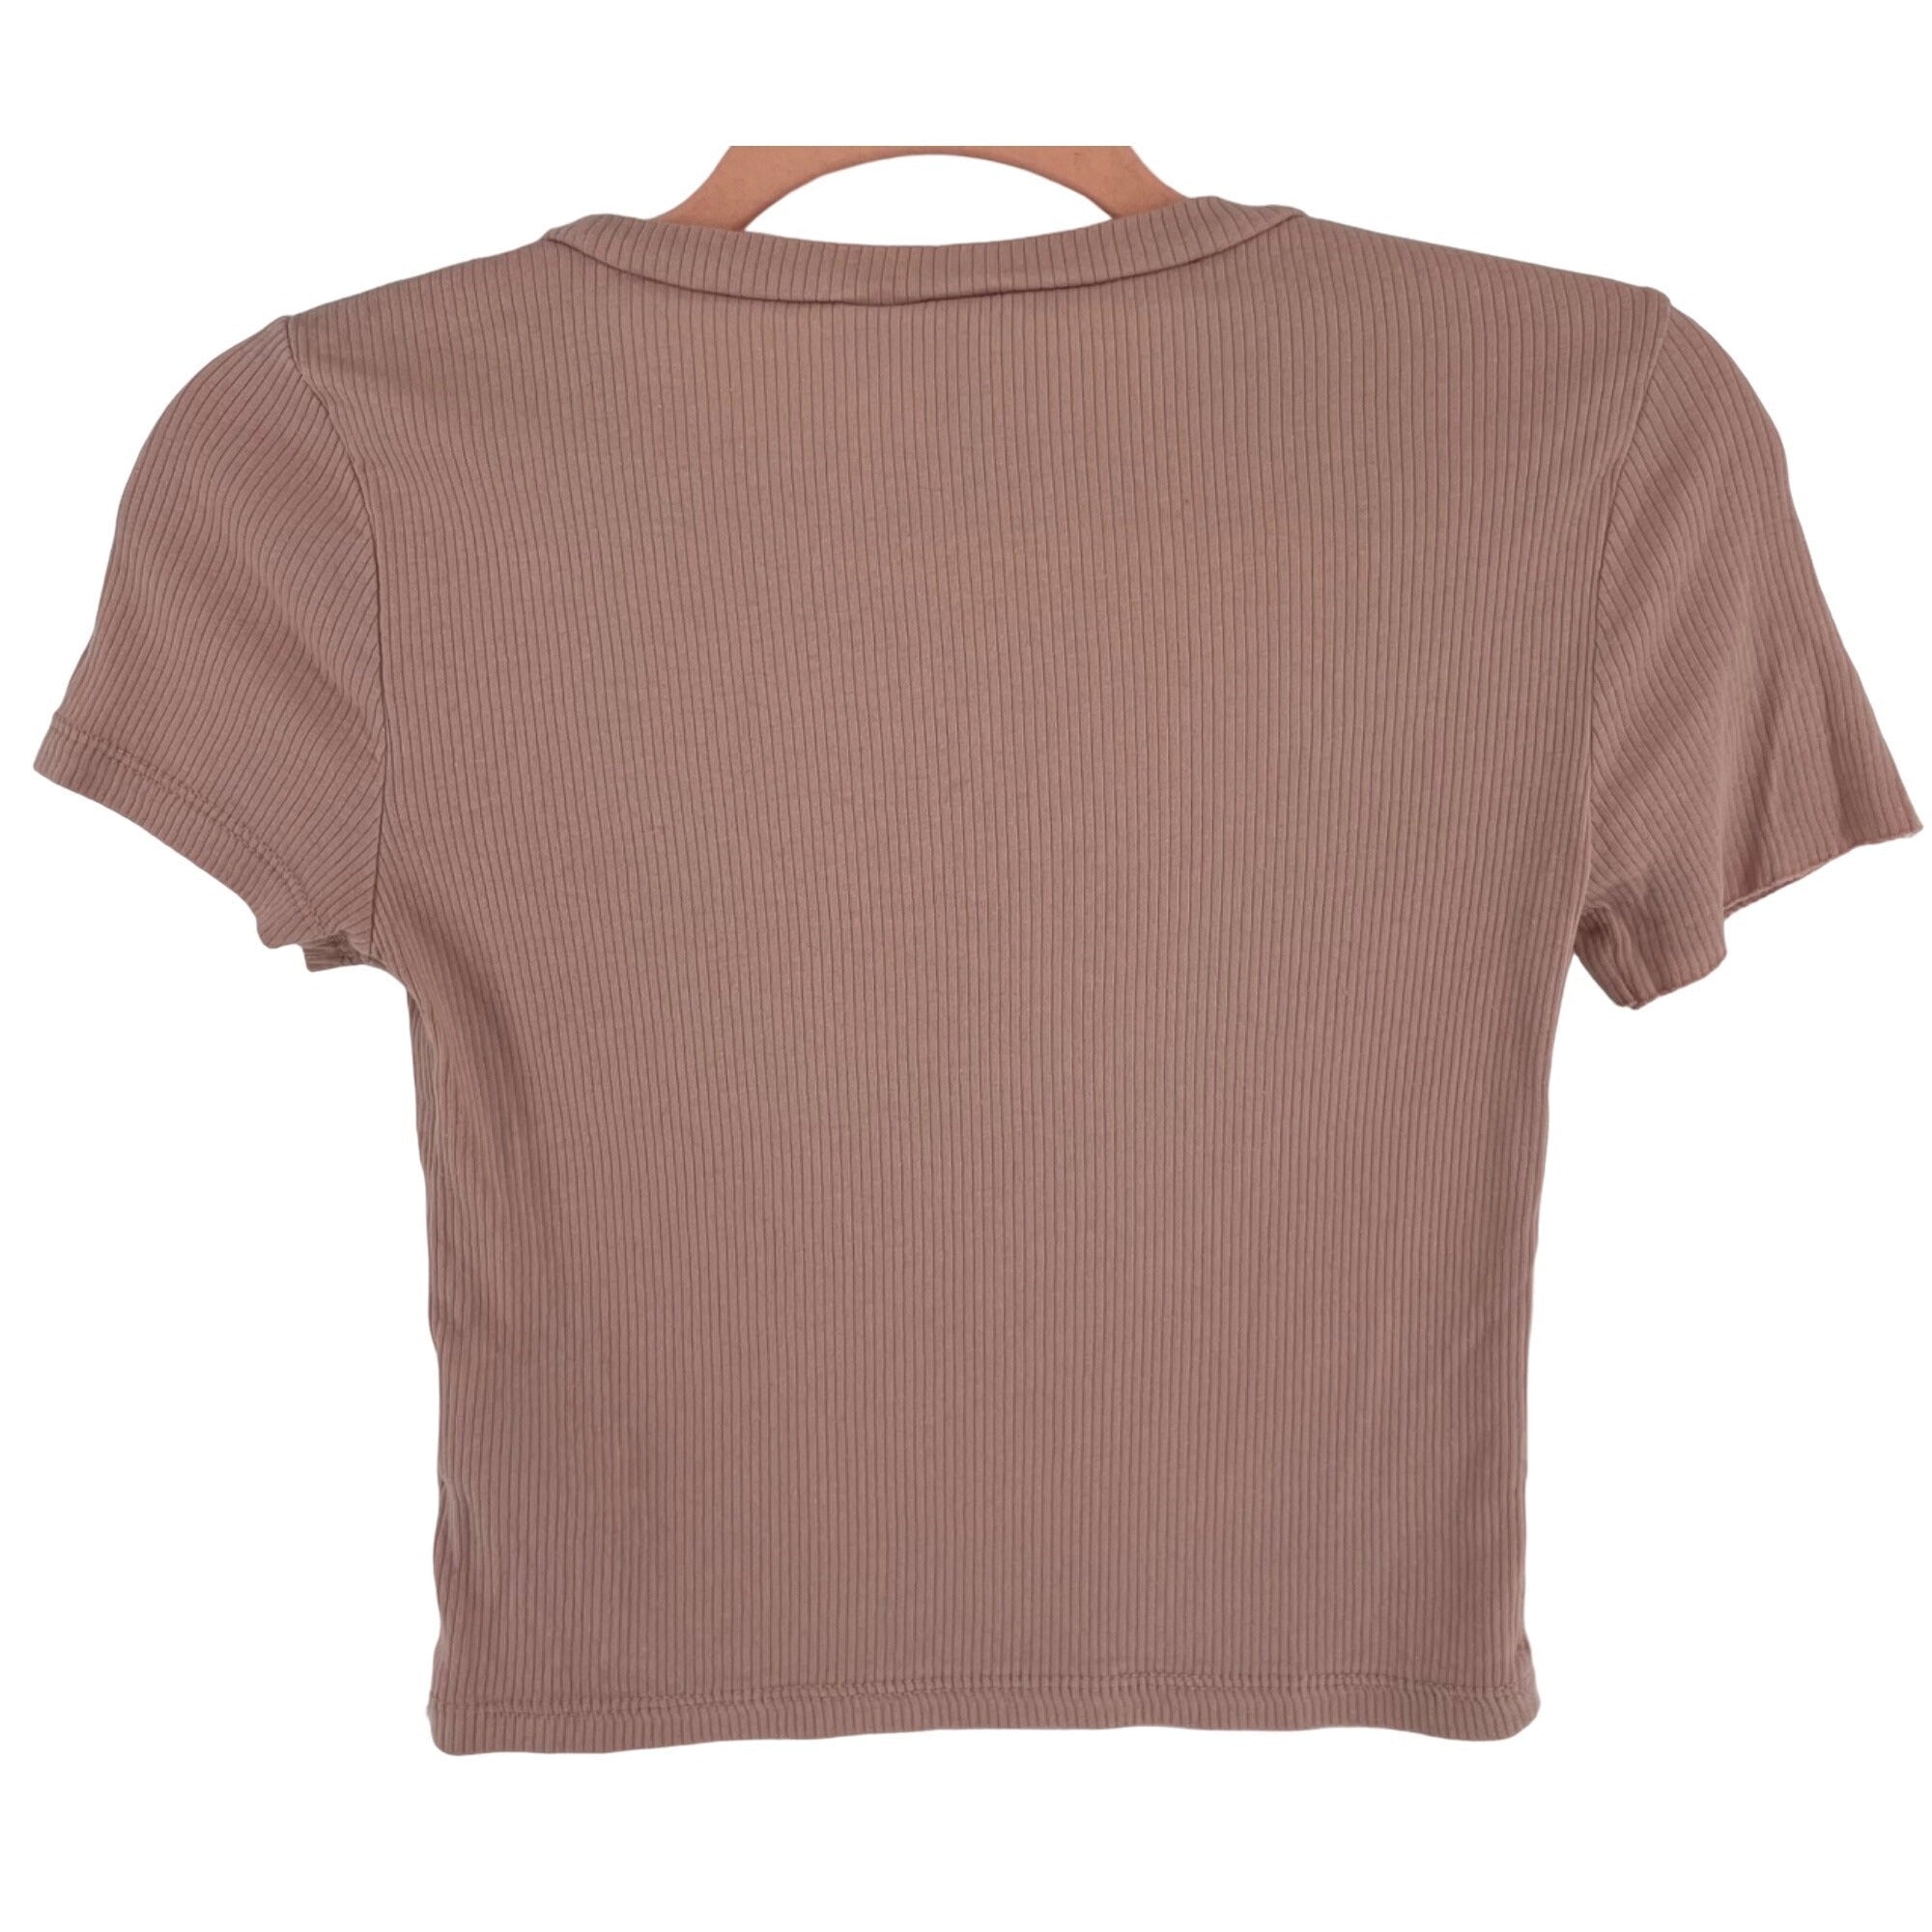 H&M Women's Size Small Mauve Pink Short-Sleeved Ribbed Crop Top